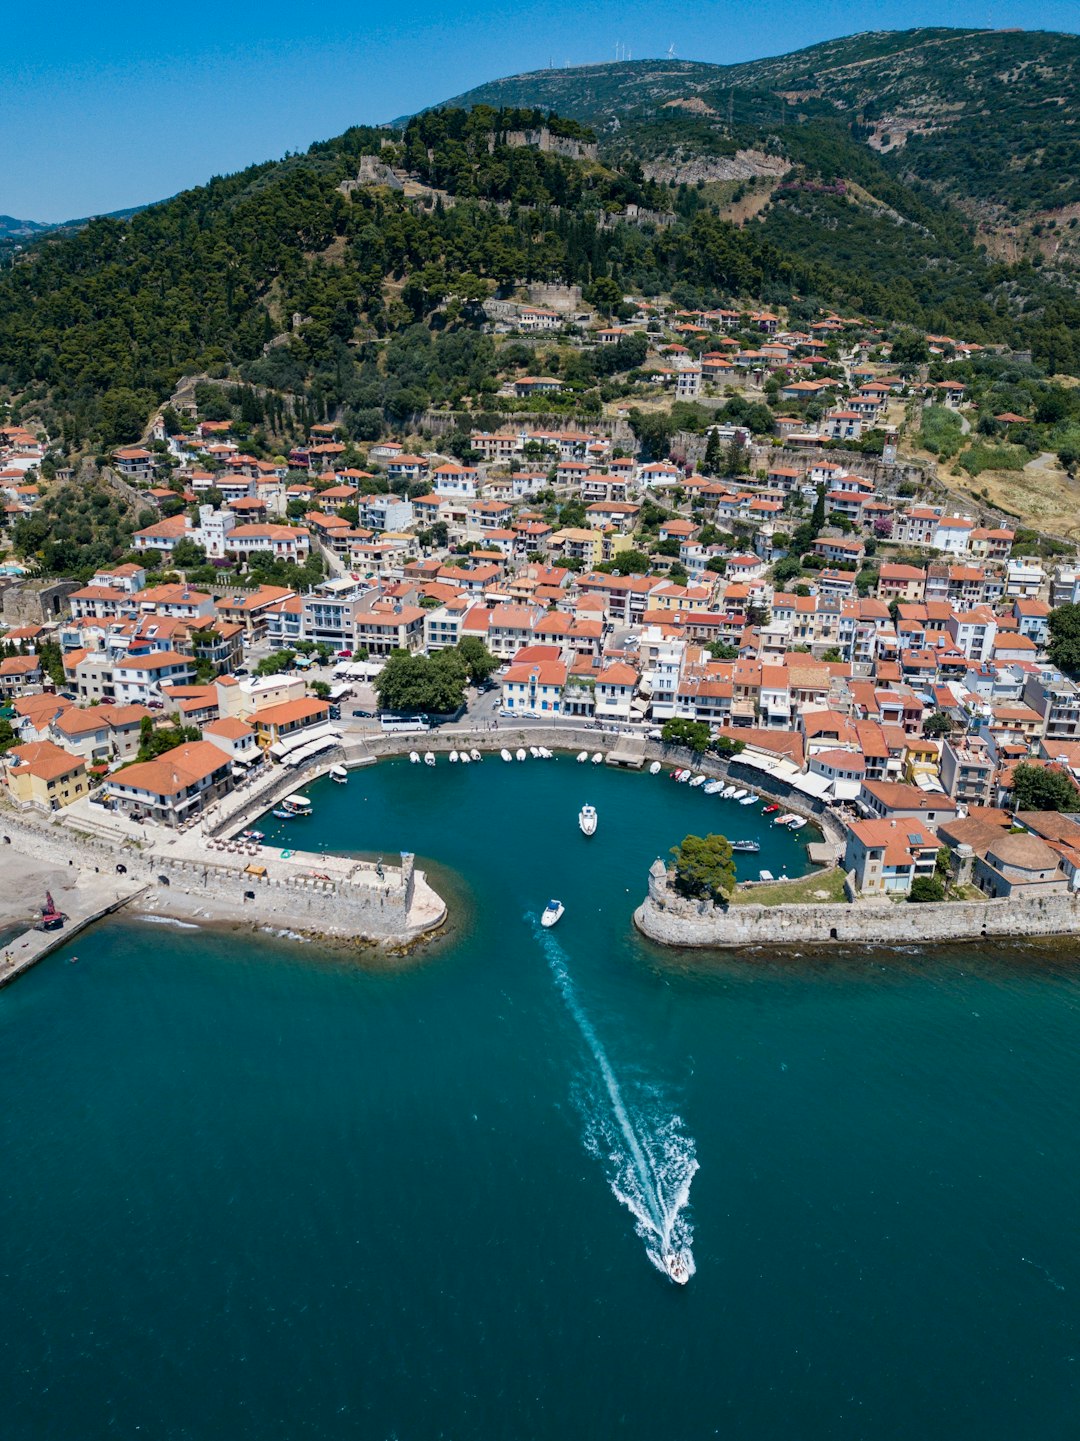 Travel Tips and Stories of Nafpaktos in Greece